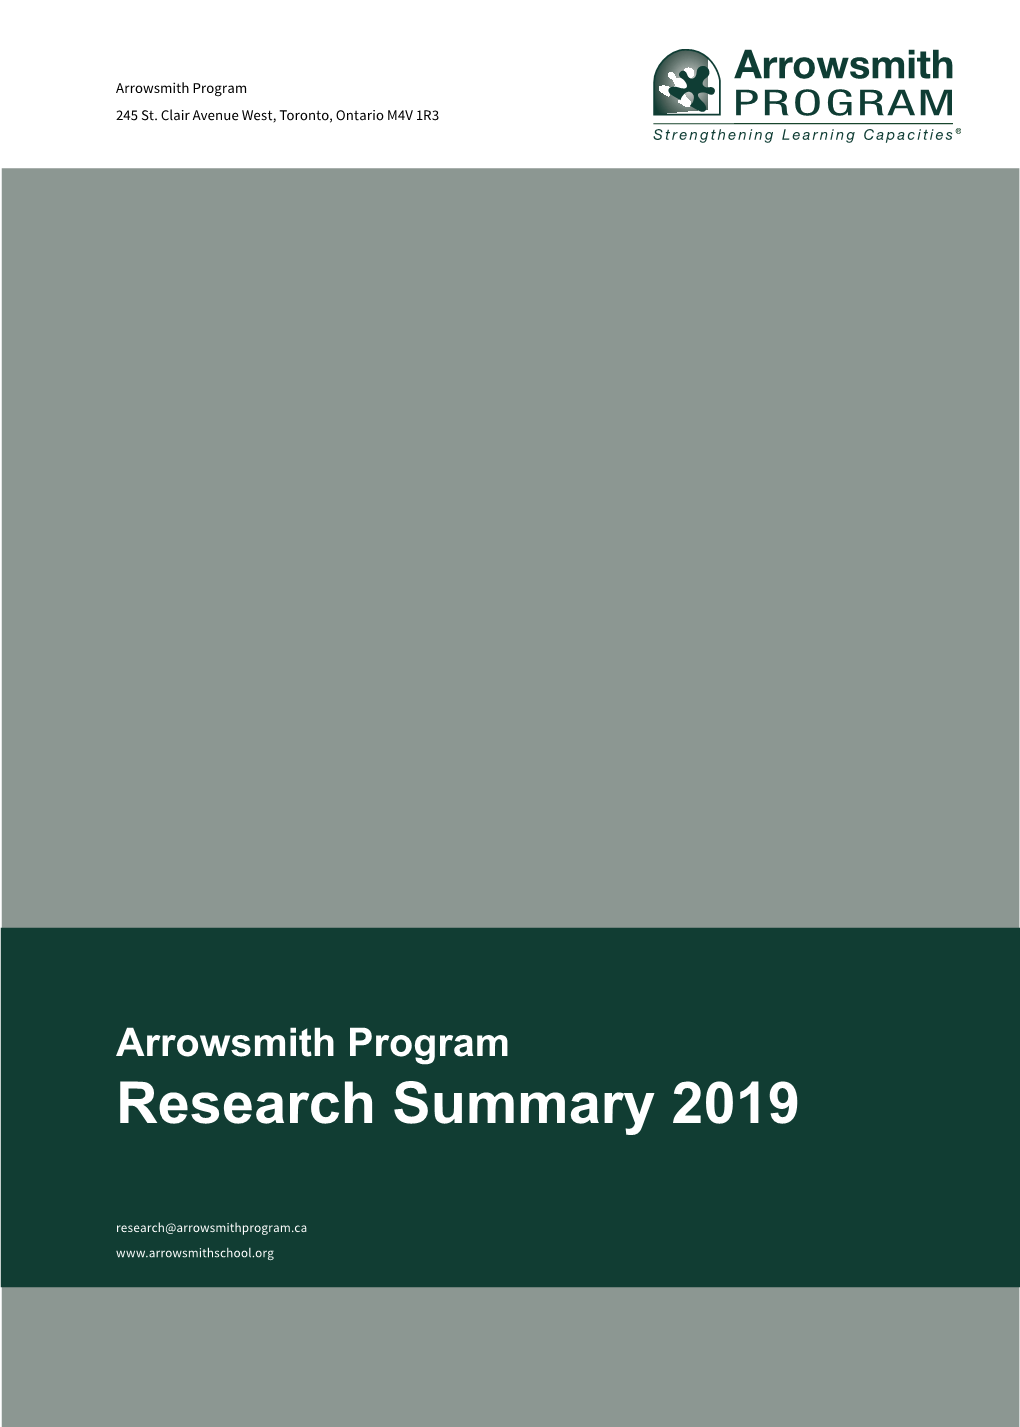 Research Summary 2019